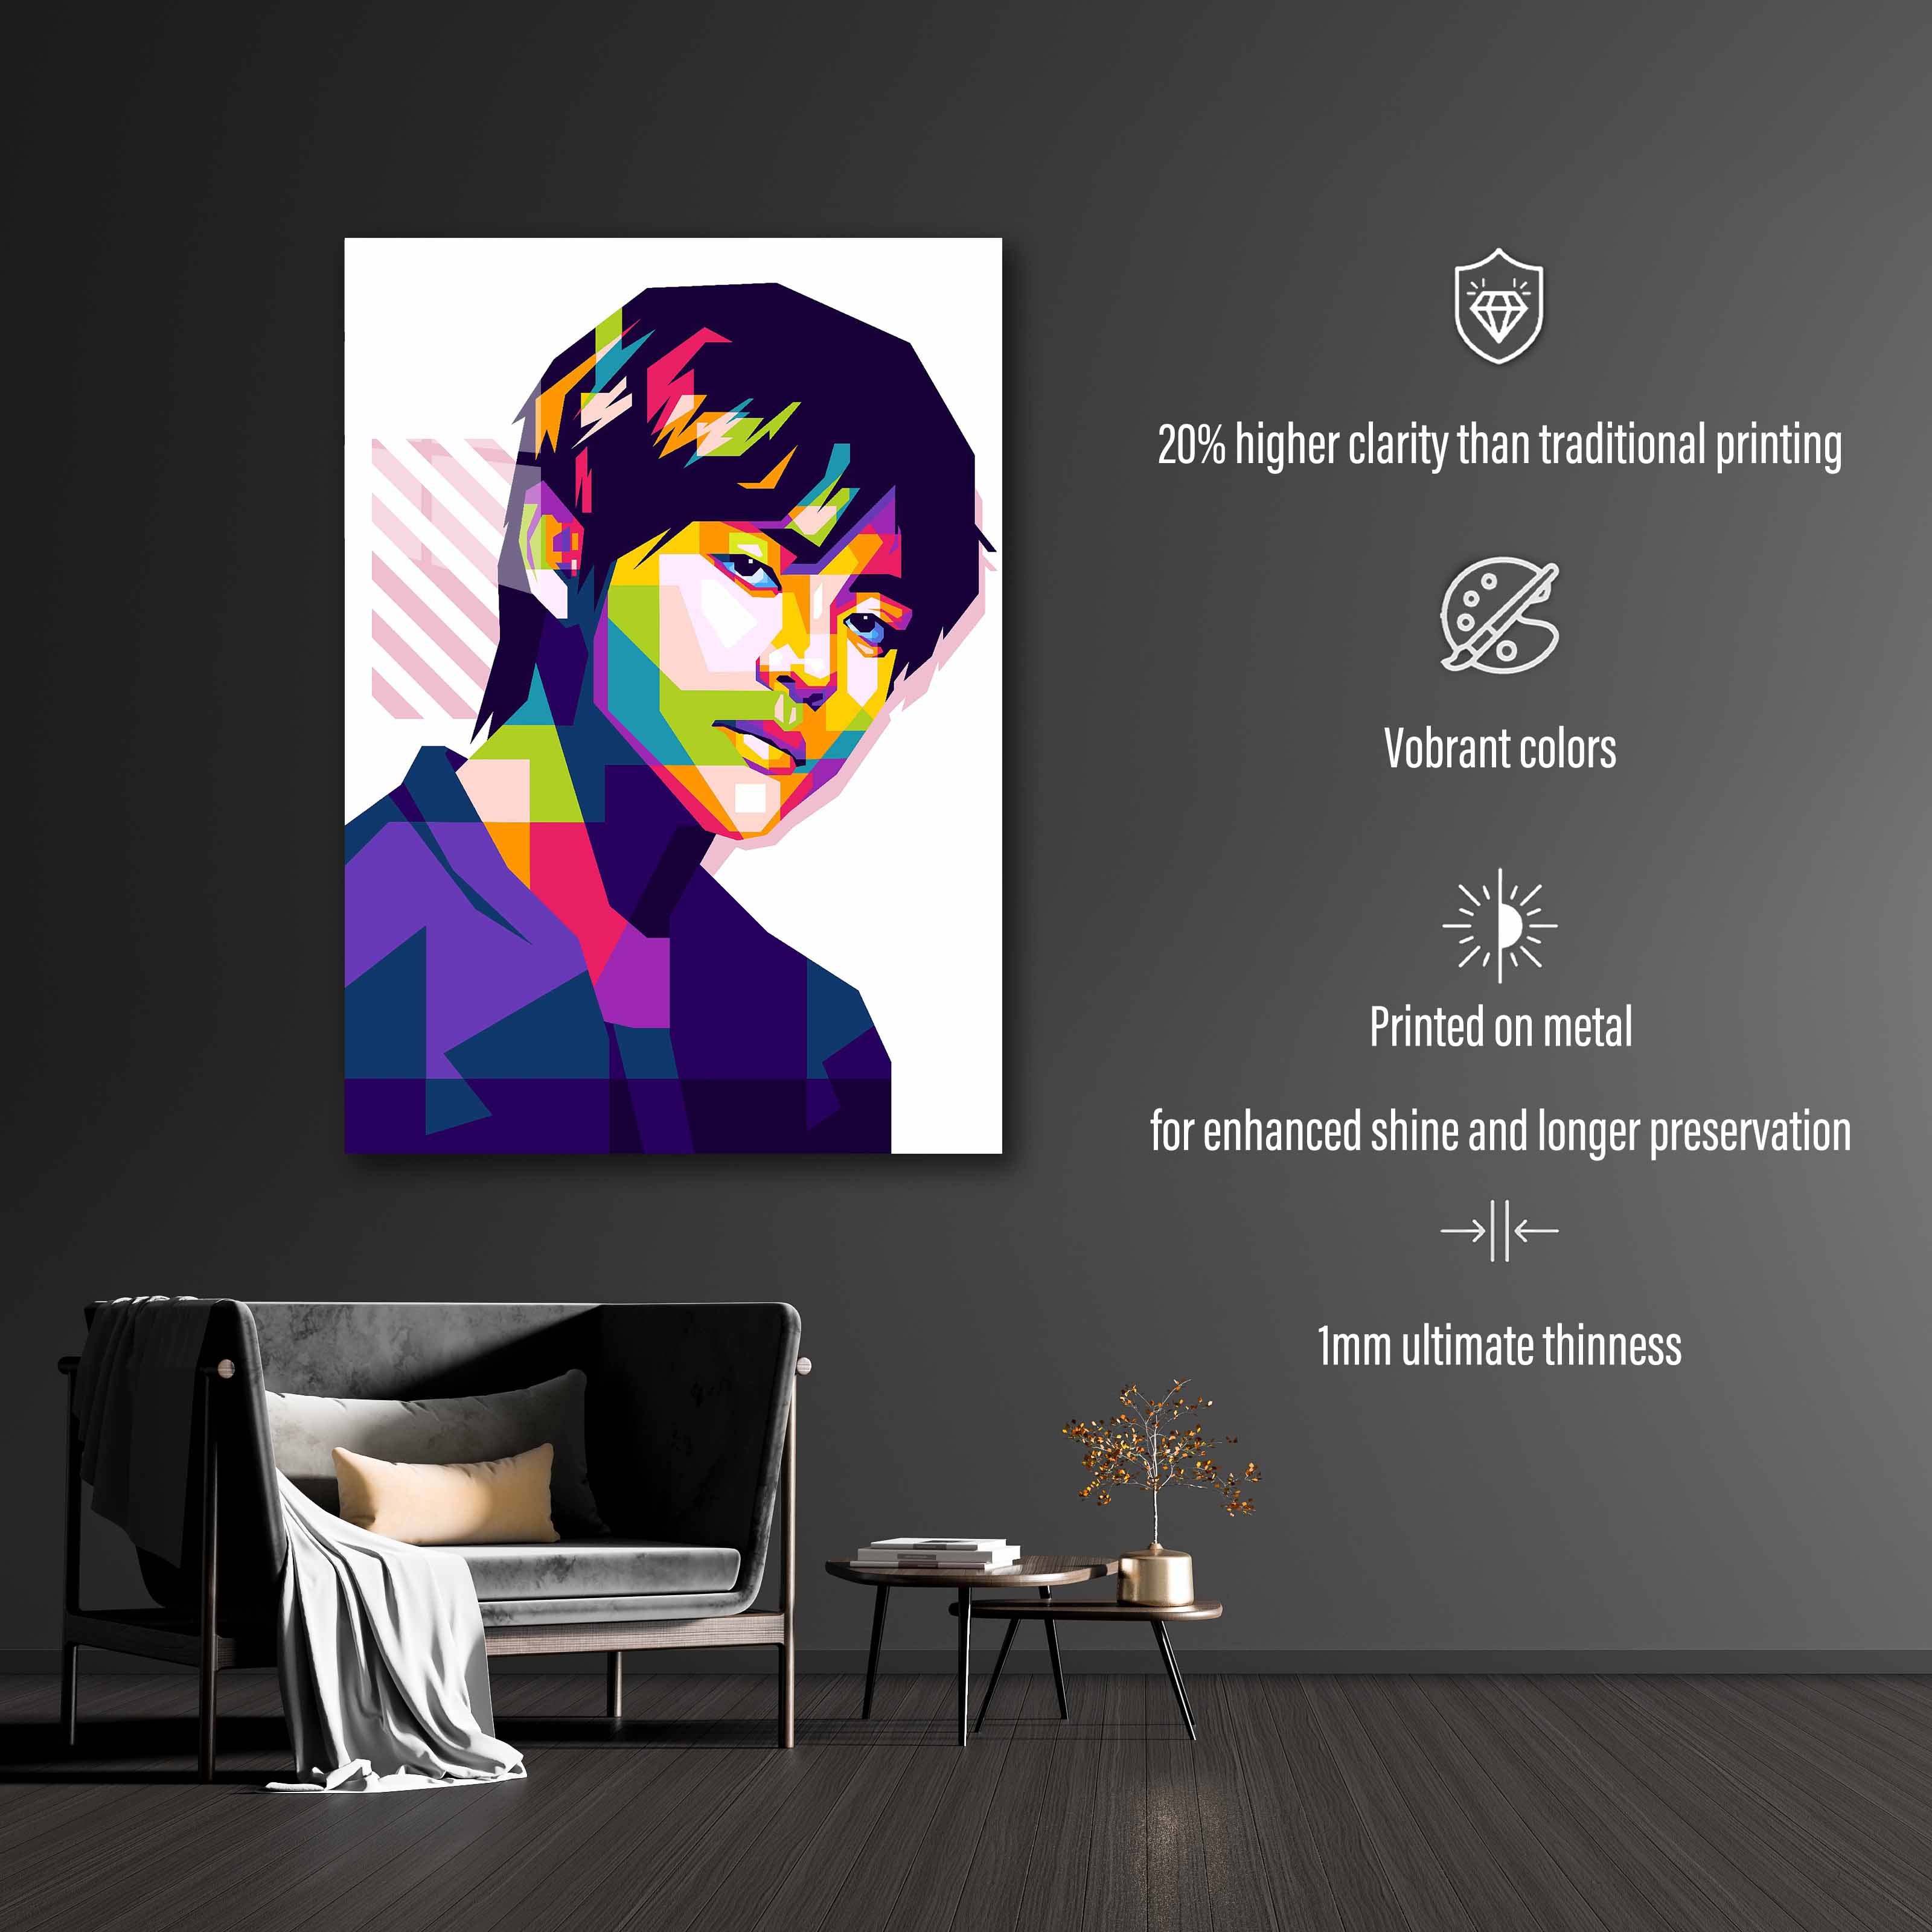 Taehyung BTS Poster-Artwork by @mmarwpap